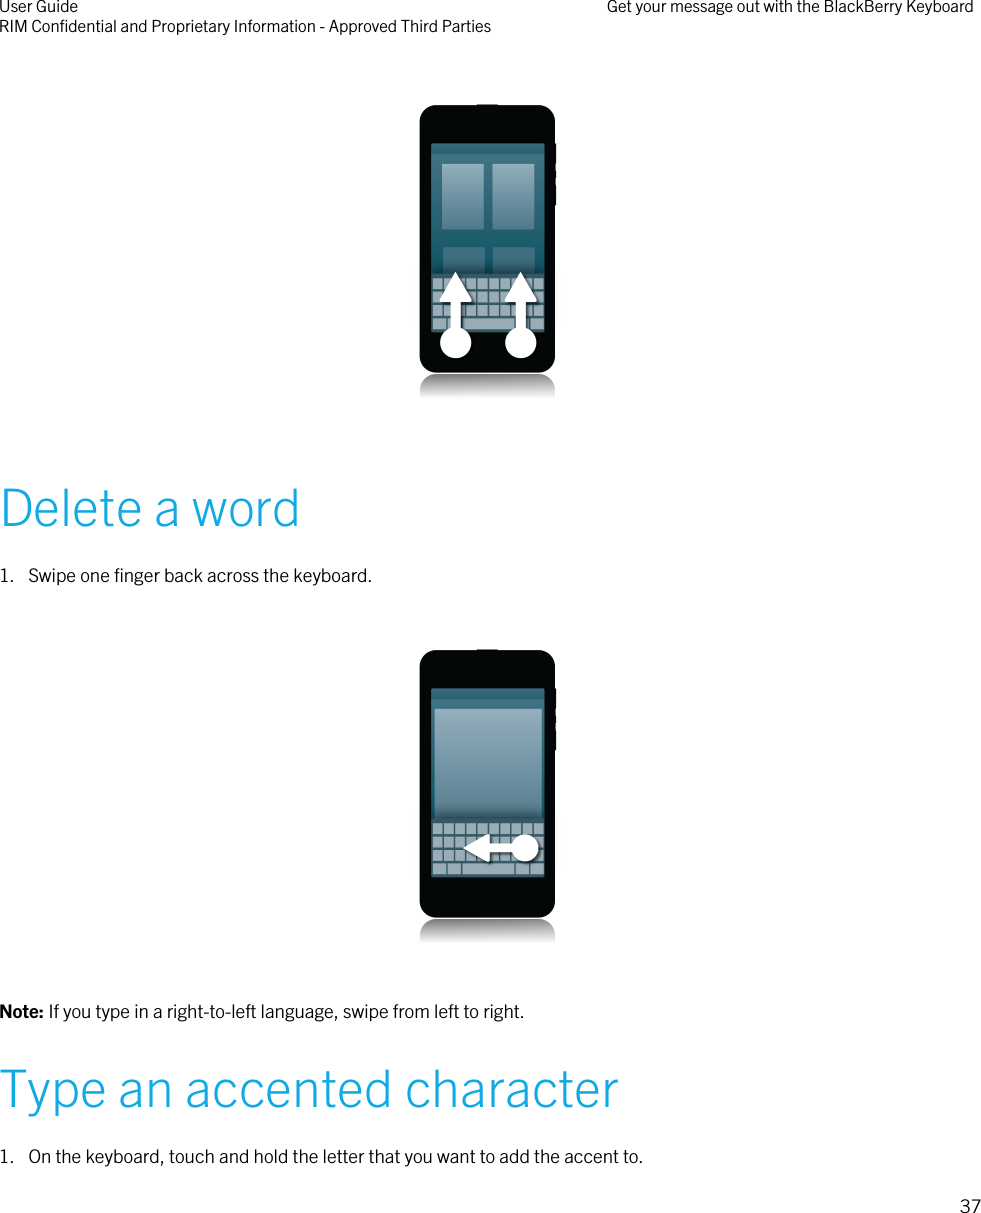   Delete a word1. Swipe one finger back across the keyboard.  Note: If you type in a right-to-left language, swipe from left to right.Type an accented character1. On the keyboard, touch and hold the letter that you want to add the accent to.User GuideRIM Confidential and Proprietary Information - Approved Third Parties Get your message out with the BlackBerry Keyboard37